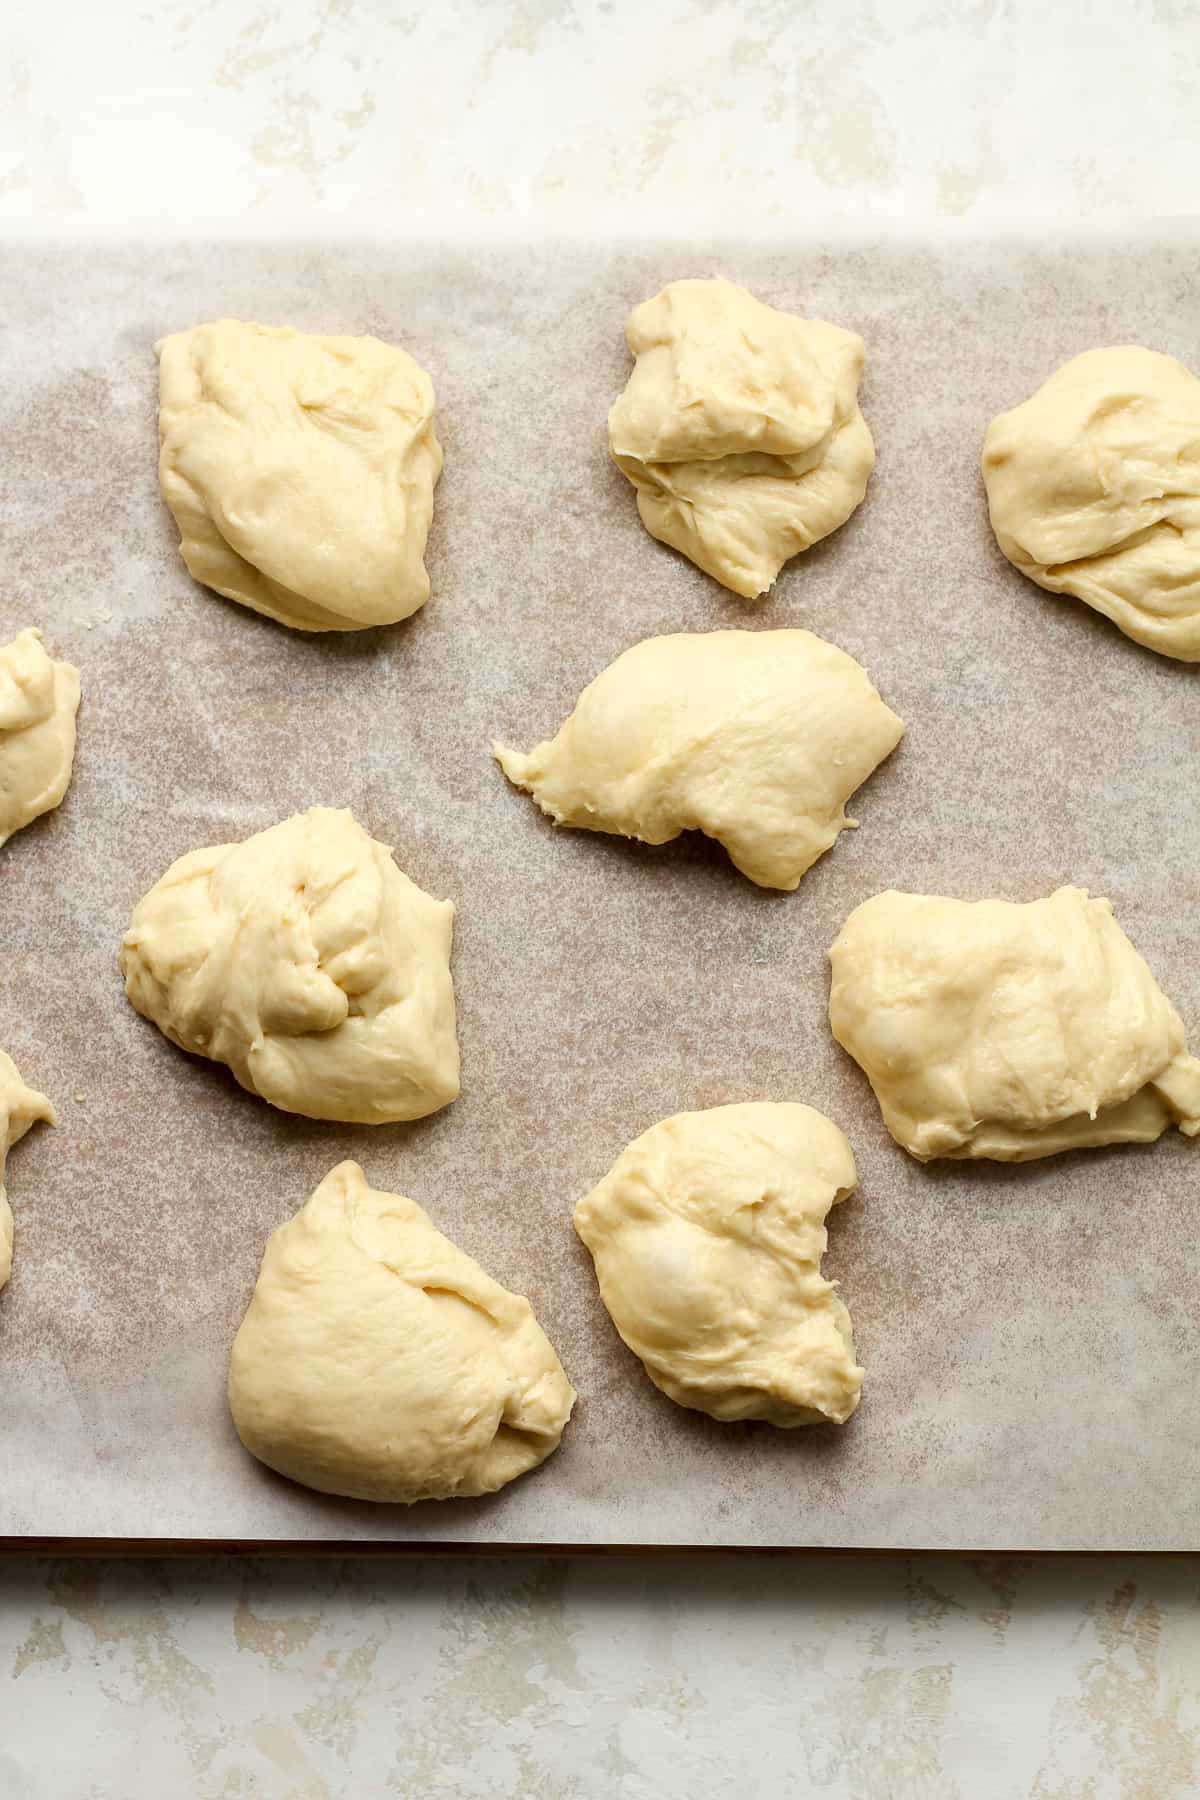 A bunch of the dinner roll dough after dividing.